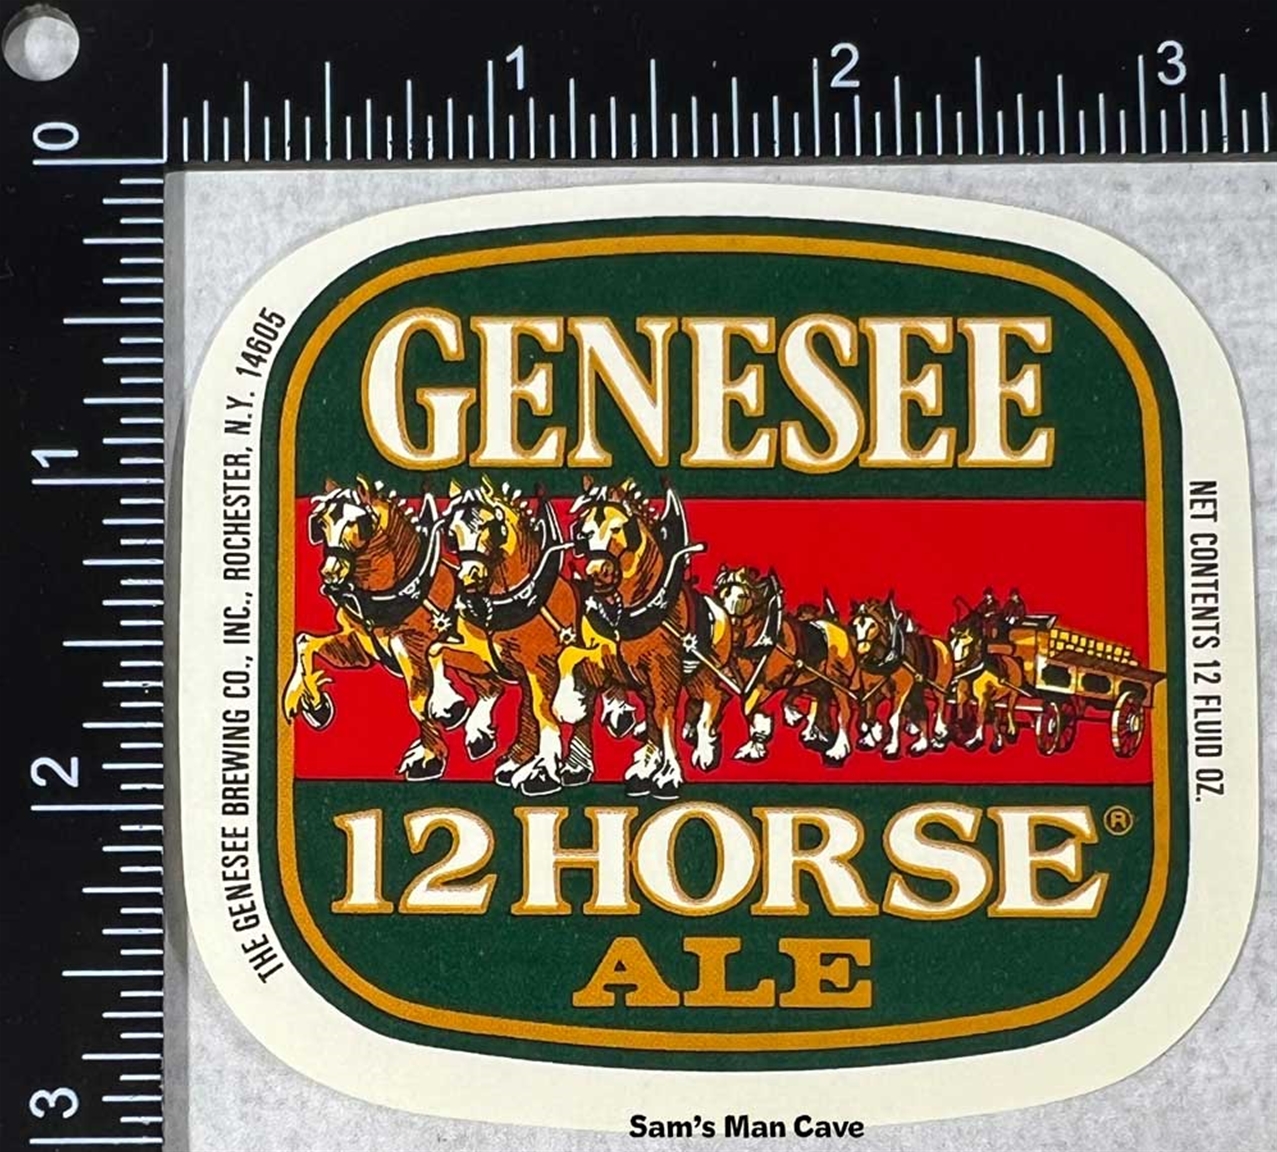 Details about   3 BEER CAN SET GENESEE 12 HORSE+CREAM+LIGHT ALE ROCHESTER,NY.NEW YORK GREEN GOLD 